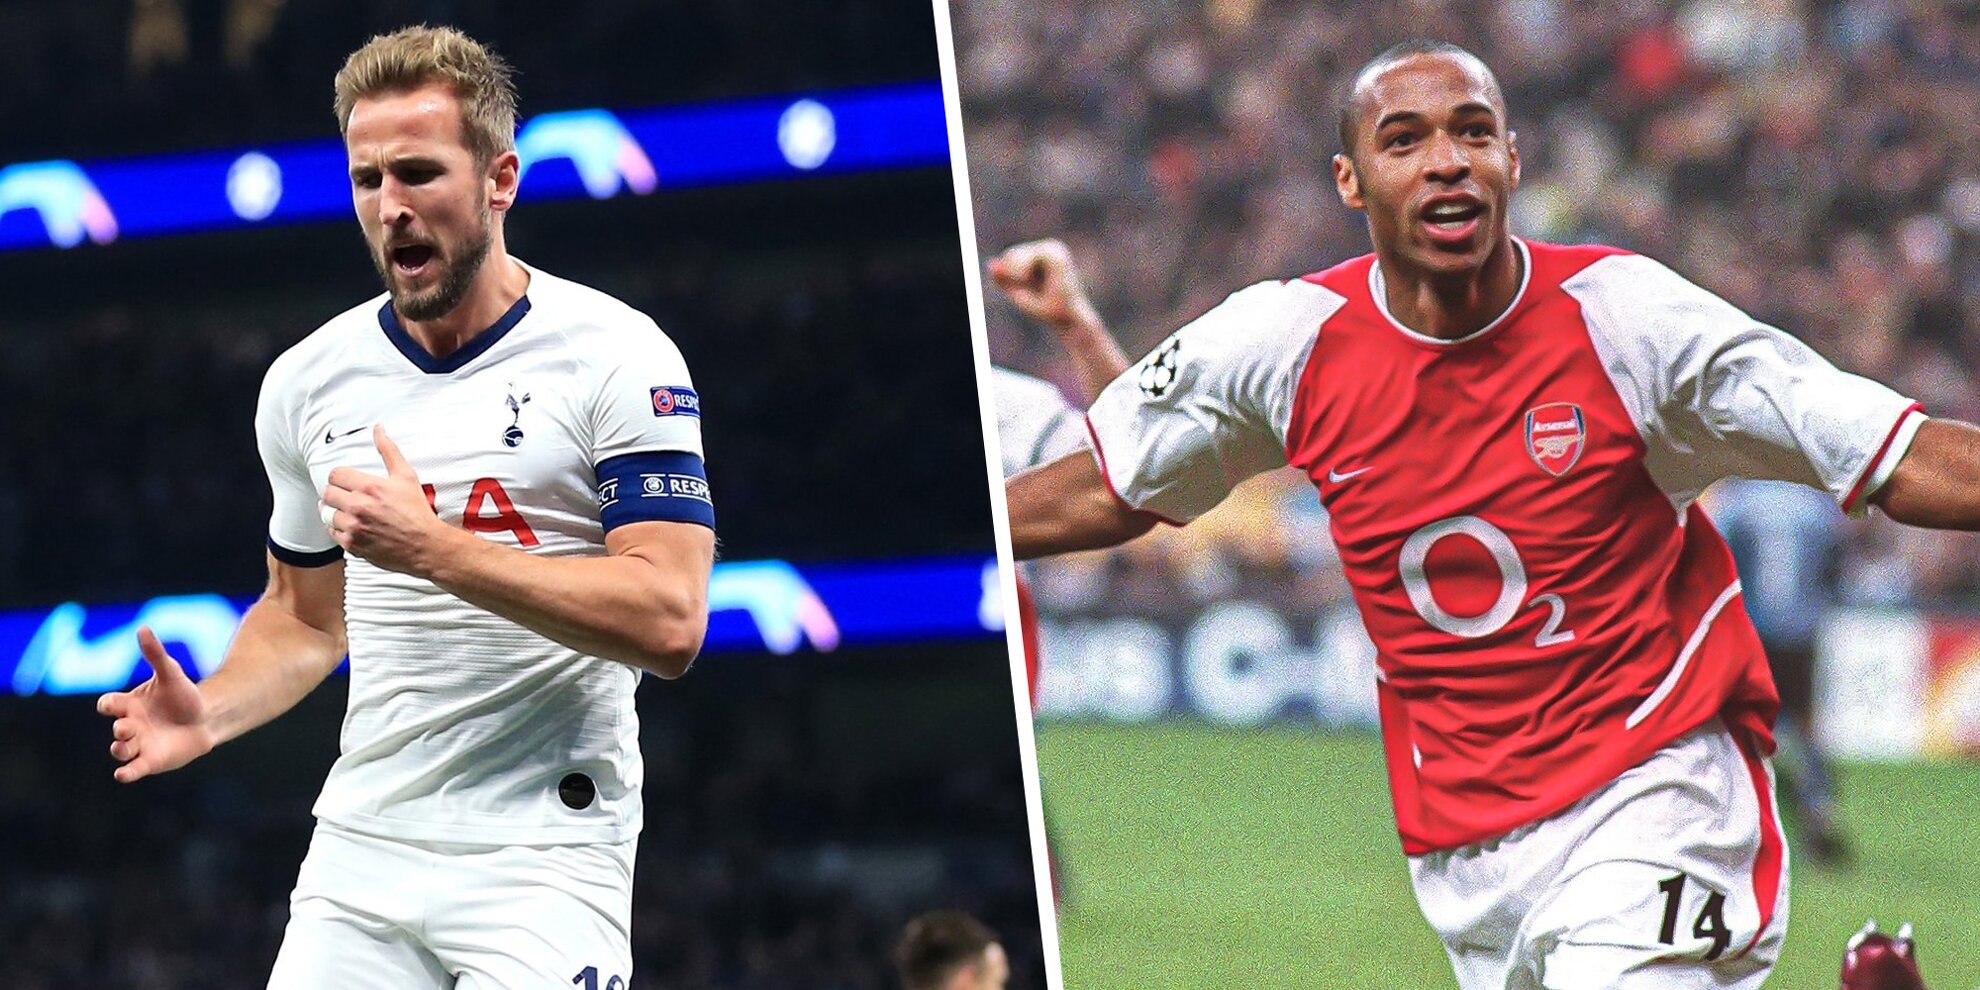 Top 10 players with most goals in North London Derby